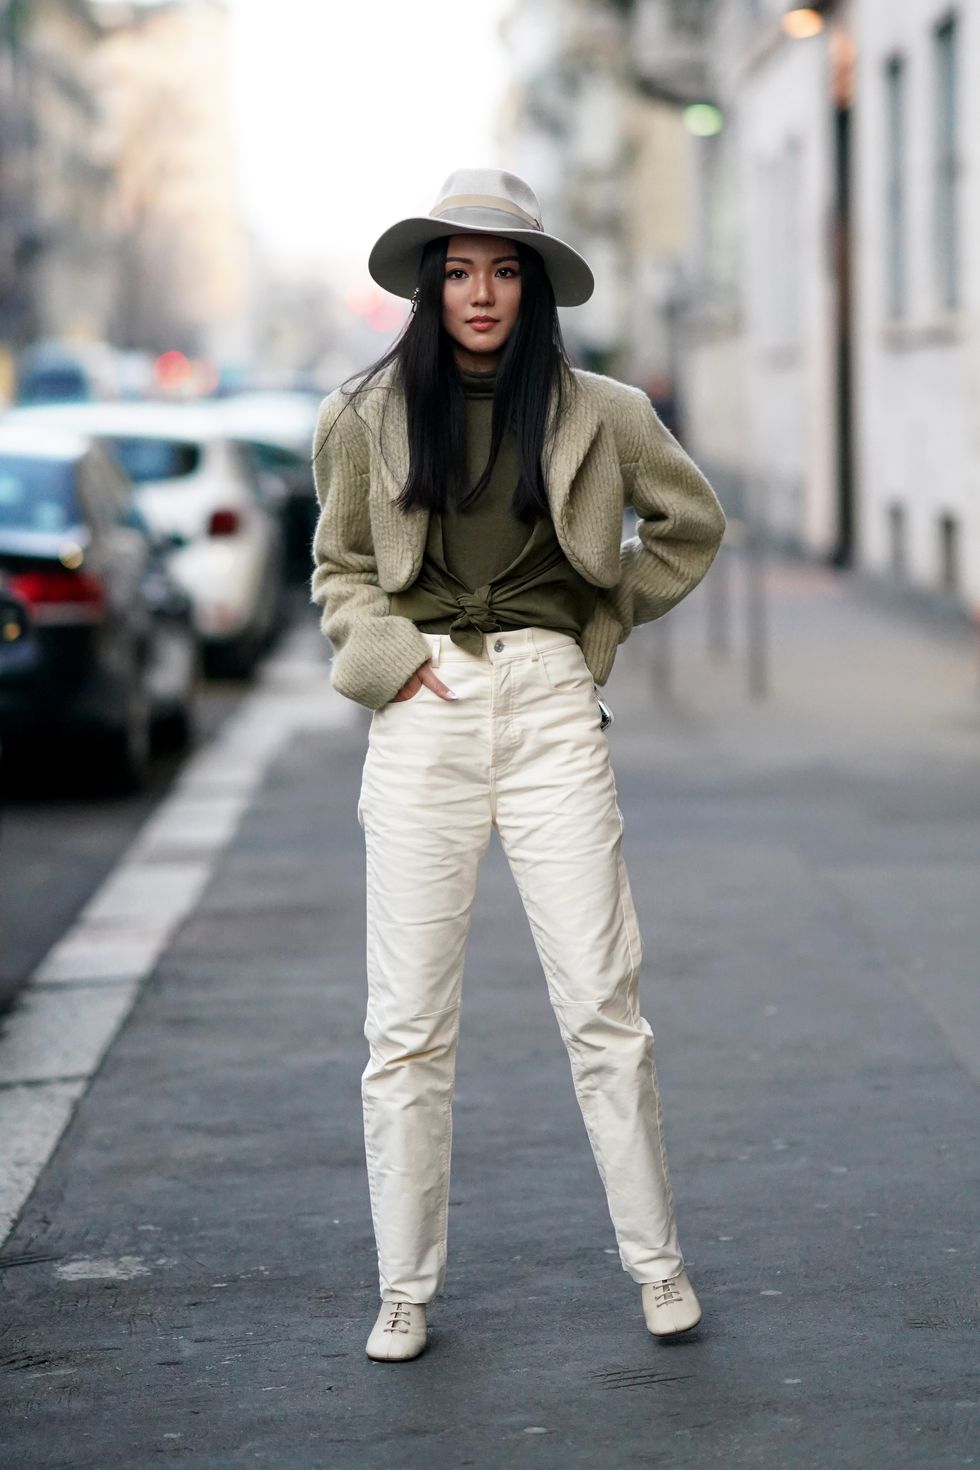 https://hips.hearstapps.com/hmg-prod/images/yoyo-cao-wears-a-white-hat-a-pale-green-wool-jacket-a-green-news-photo-1701687672.jpg?crop=1xw:1xh;center,top&resize=980:*